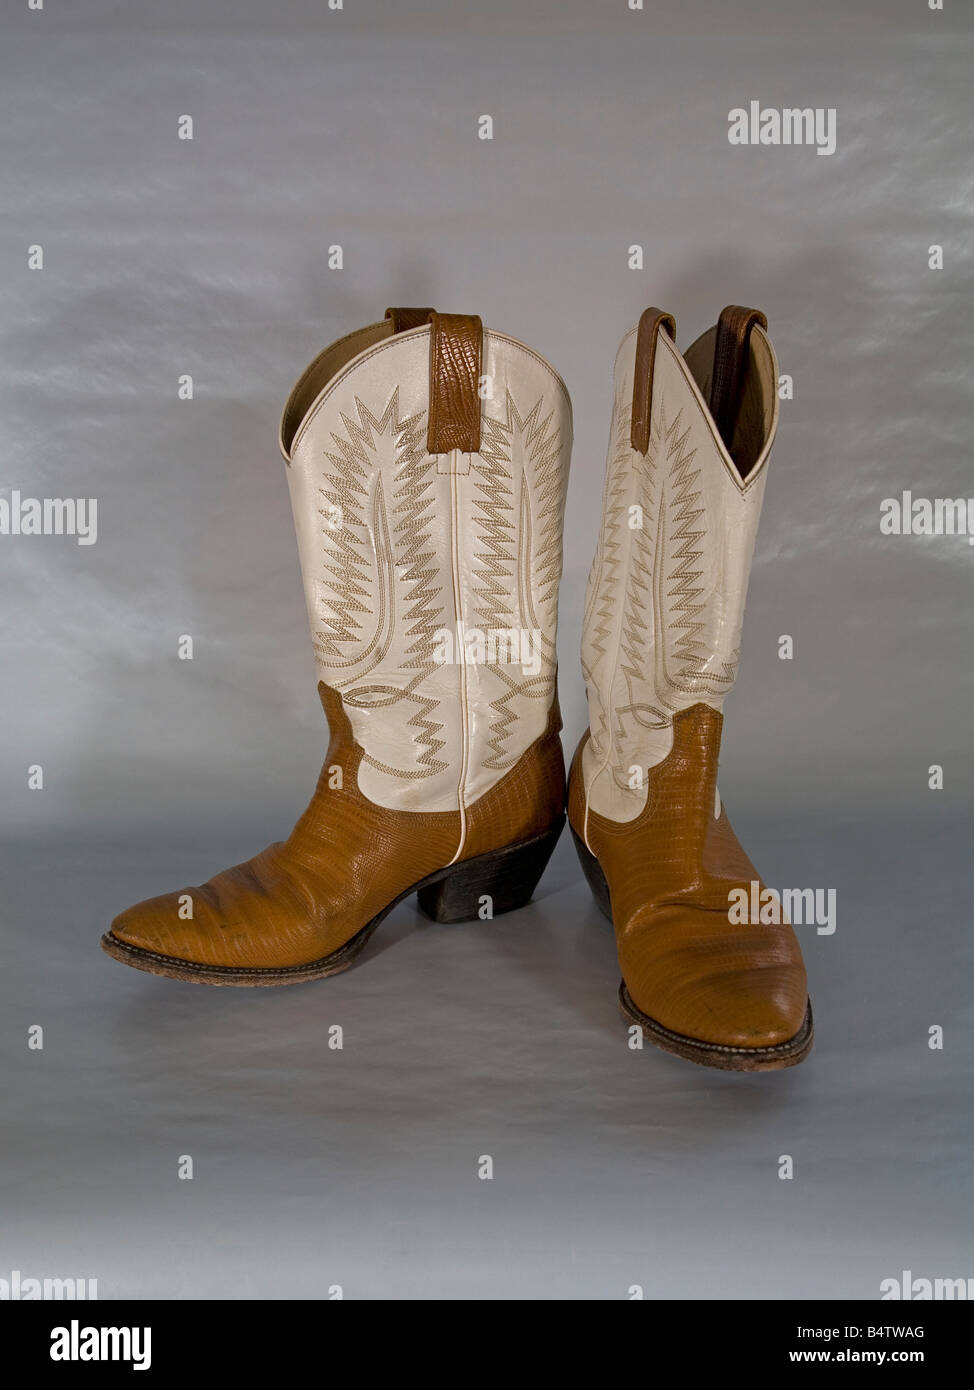 A pair of embroidered high heeled high topped western cowboy boots made in Mexico Stock Photo